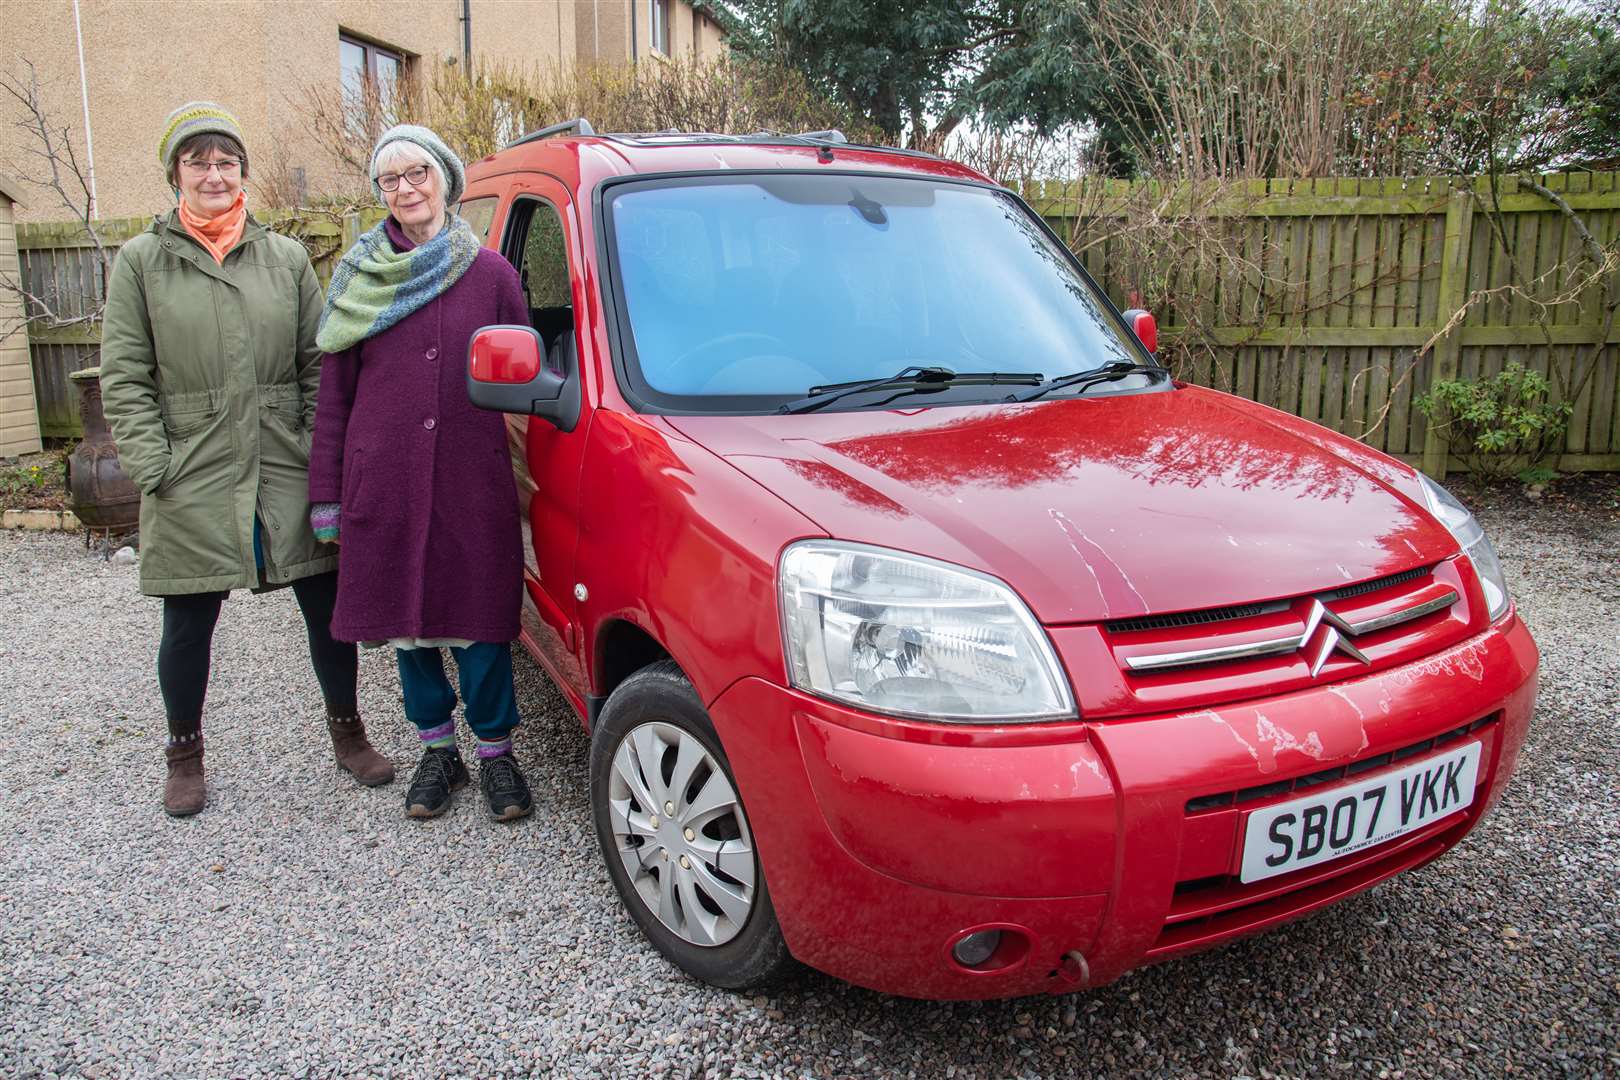 Helena and Julie share a car as there is no need for them to own two. Picture: Daniel Forsyth